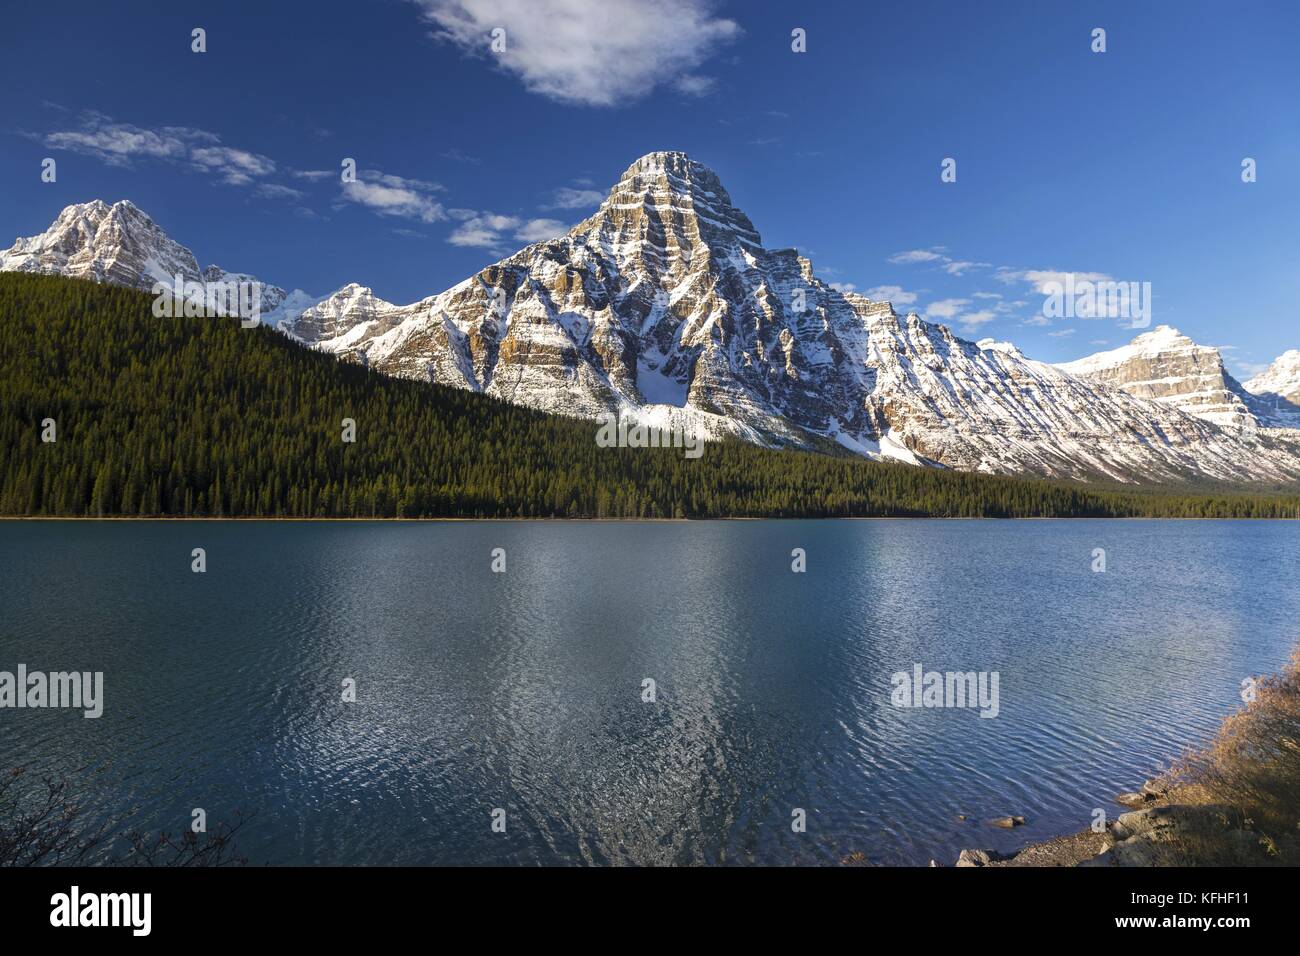 Snowcapped Mountain Chephren reflected in Waterfowl Lakes on Icefields Parkway in Banff National Park Canadian Rockies Stock Photo